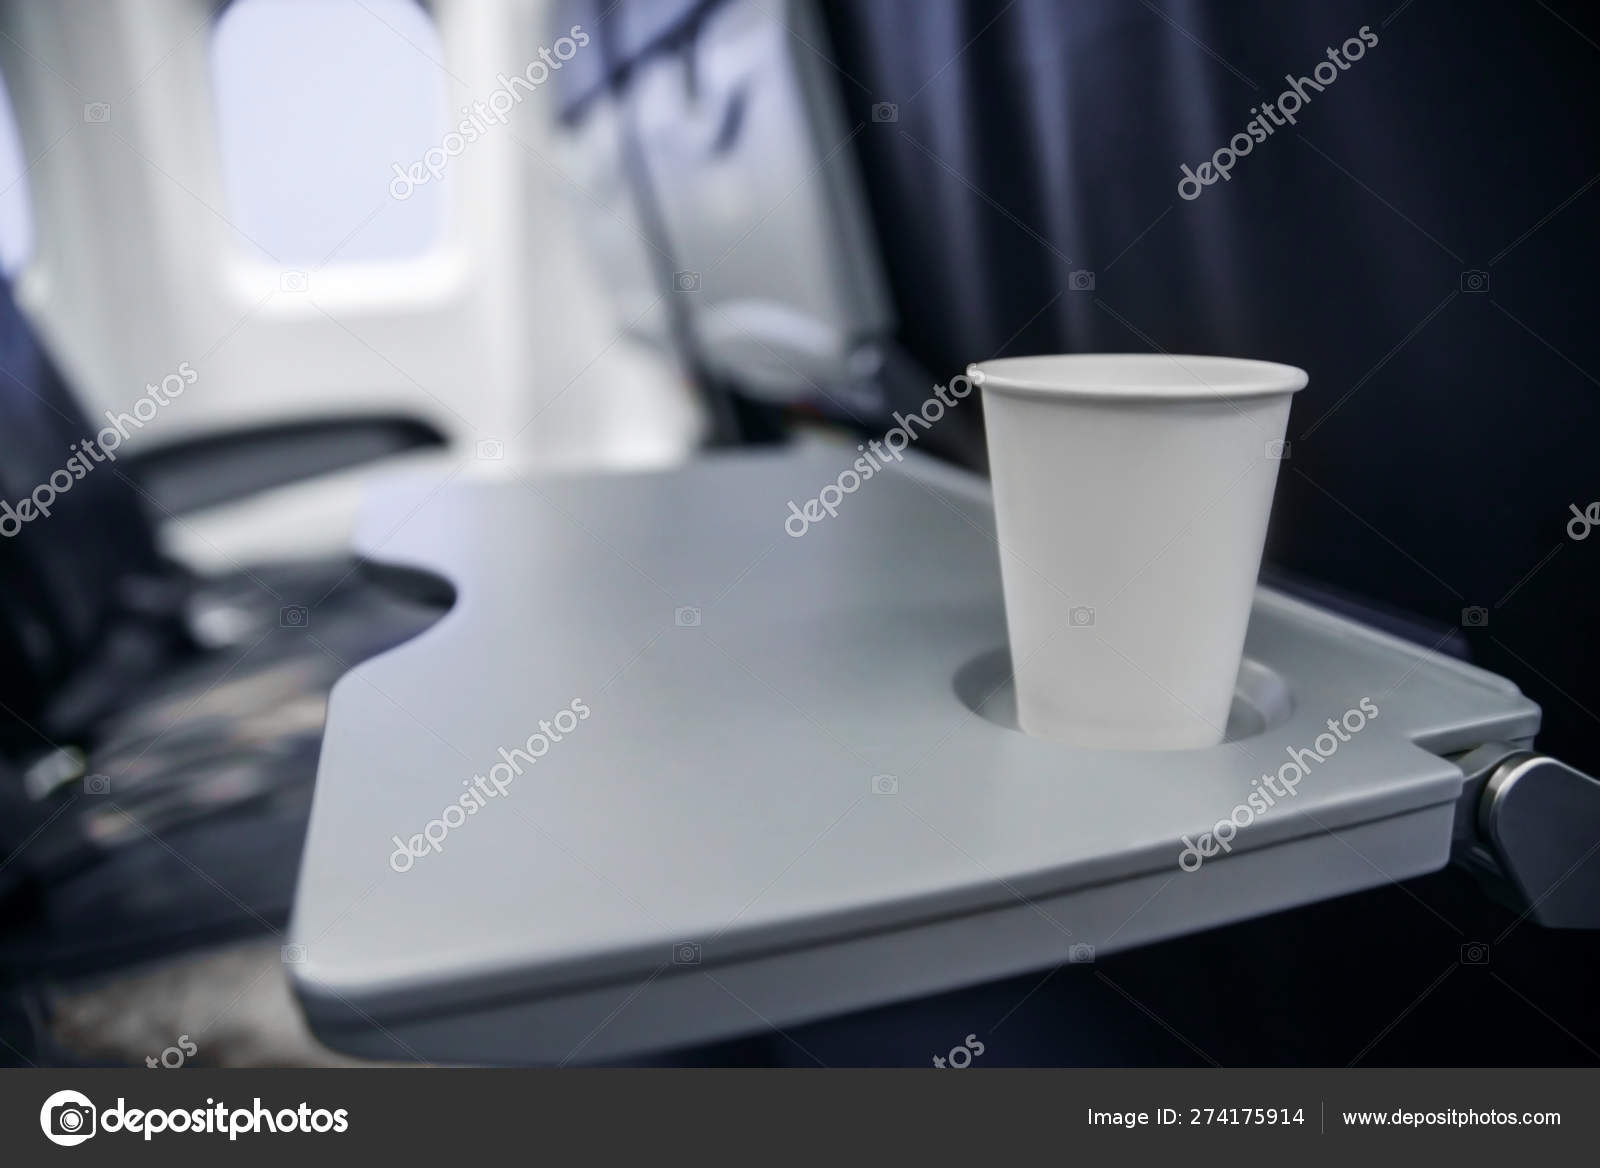 Plastic cup on the table in the plane during the flight. alcohol